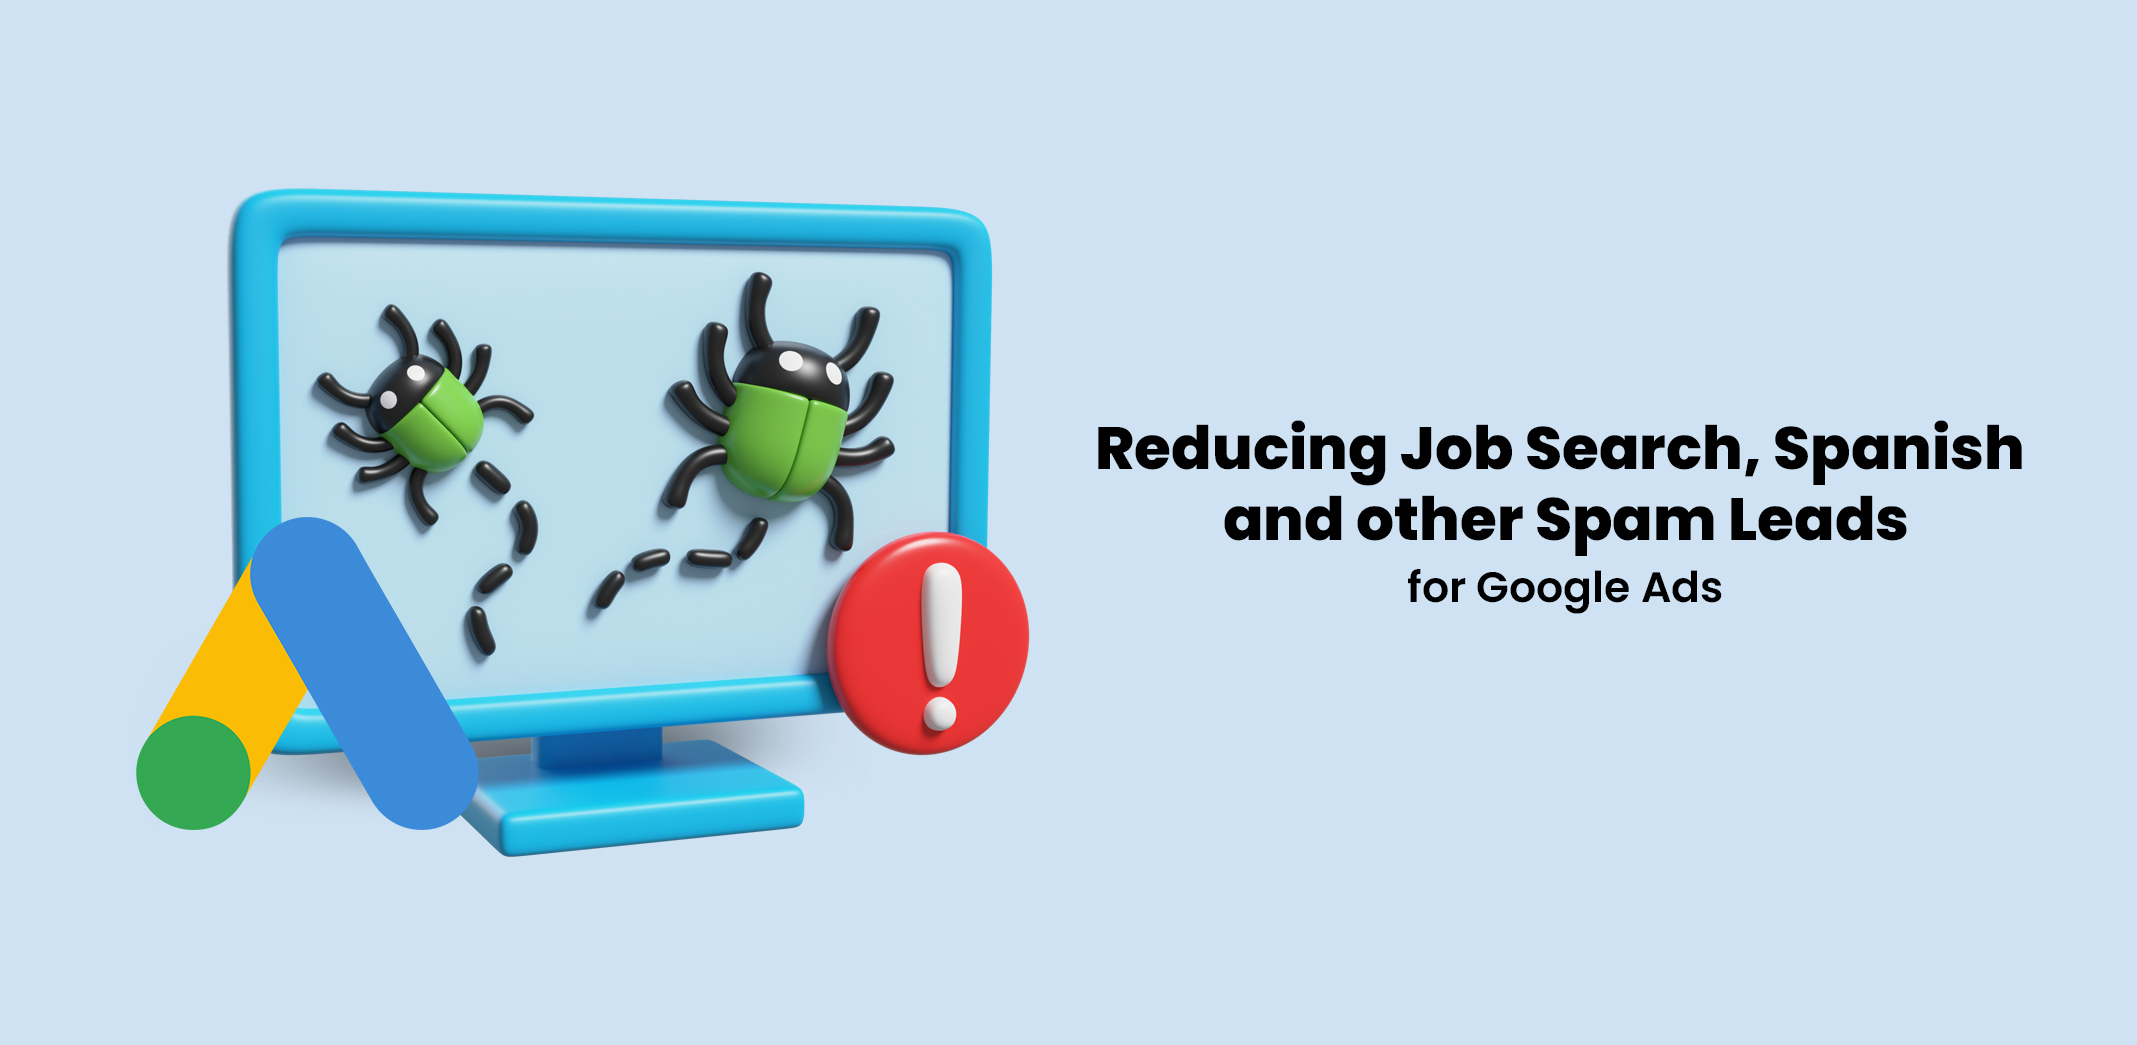 How to eliminate spam, Spanish, and job-seeking leads from your Google Ads?